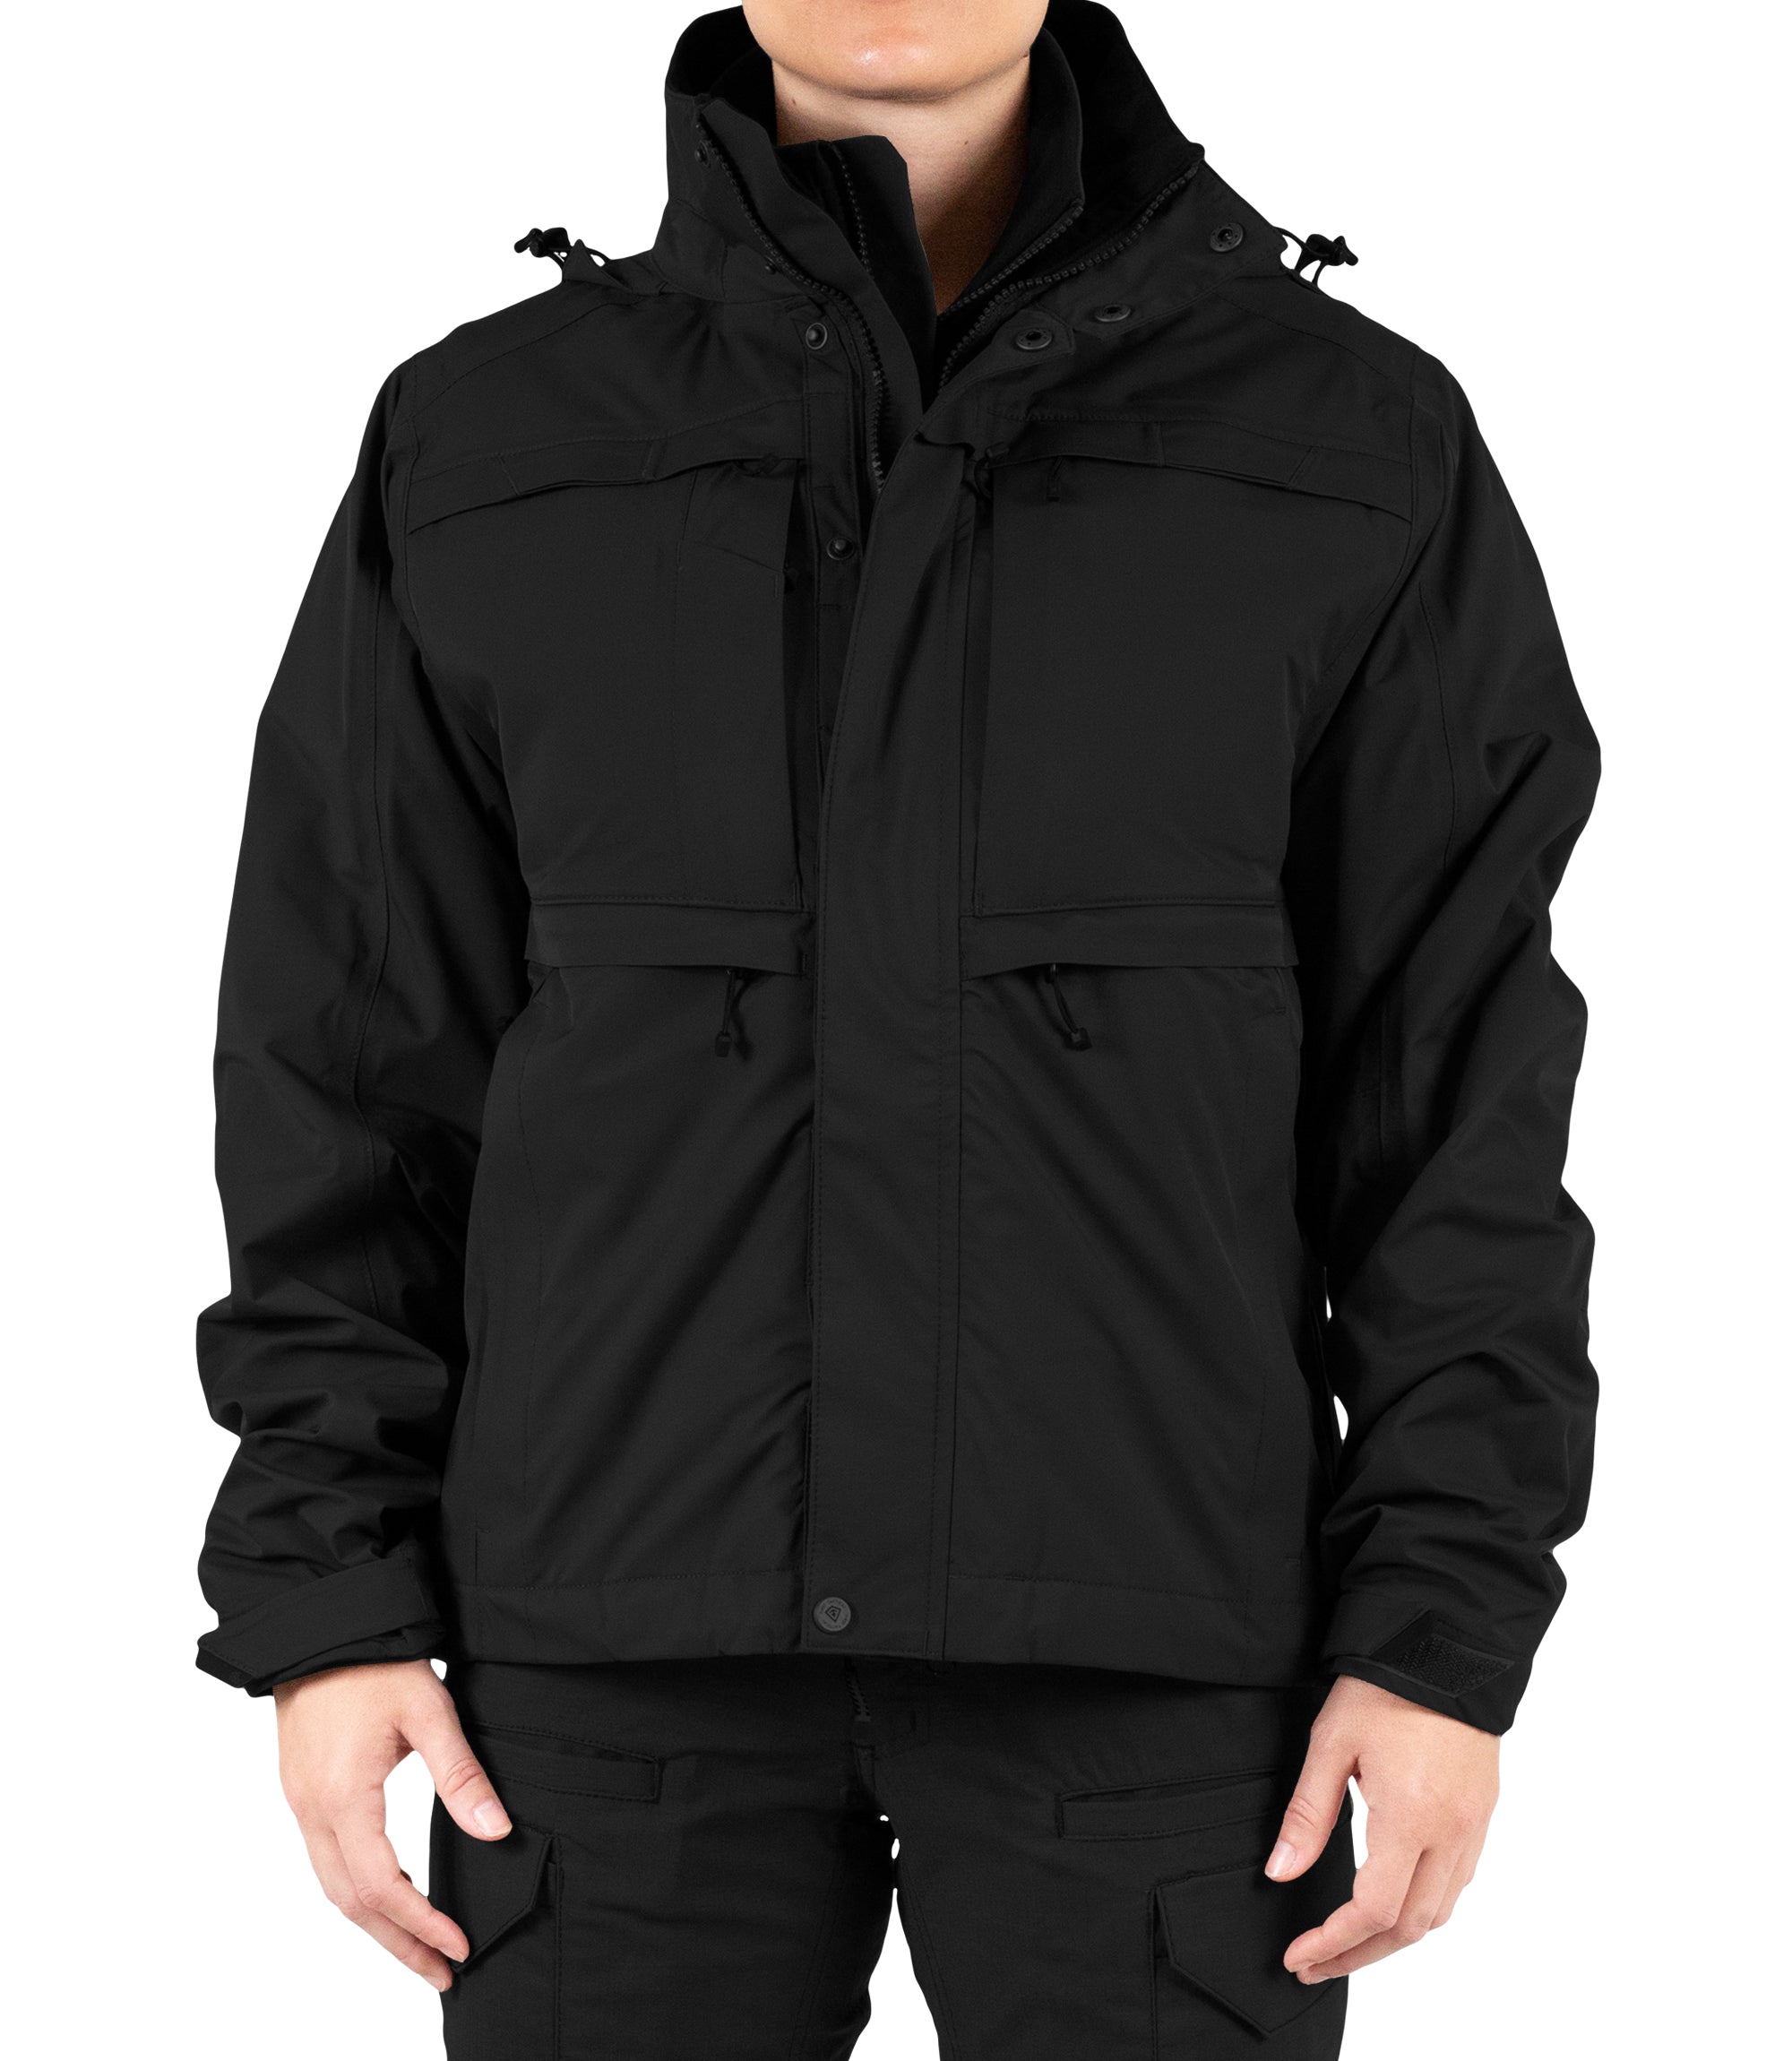 Women’s Tactix 3-In-1 System Jacket – First Tactical